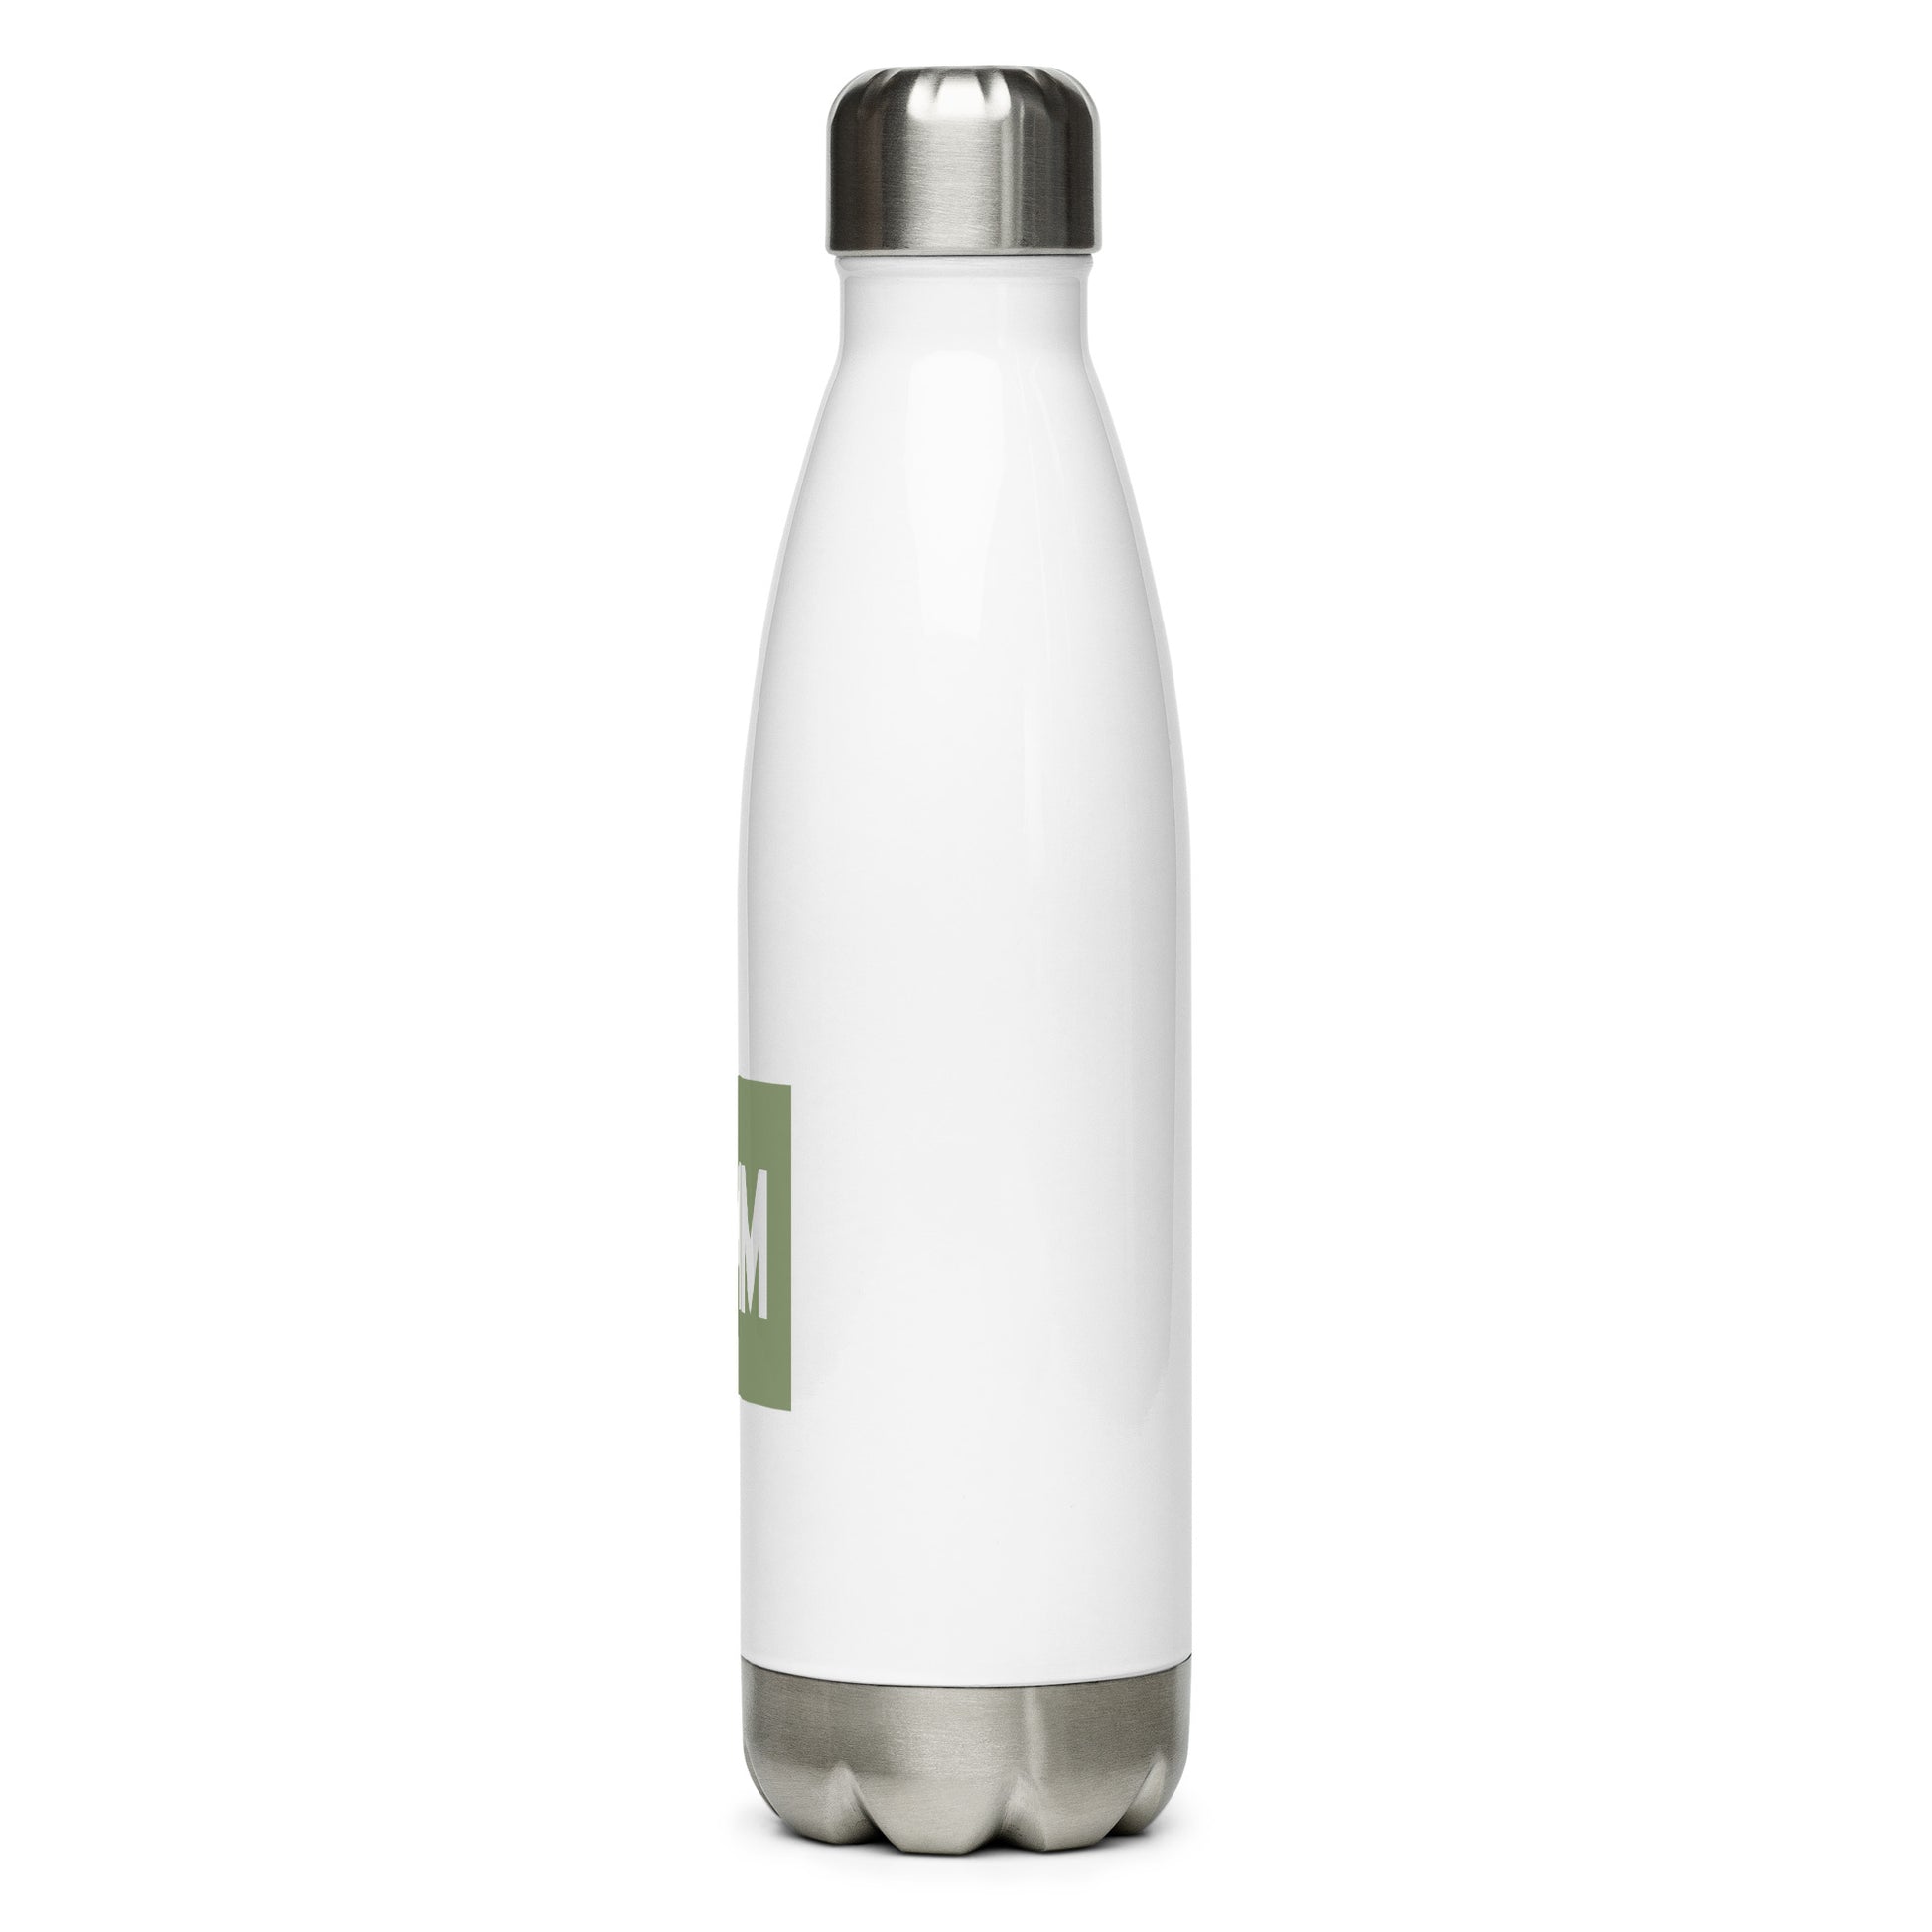 Aviation Gift Water Bottle - Camo Green • YMM Fort McMurray • YHM Designs - Image 08